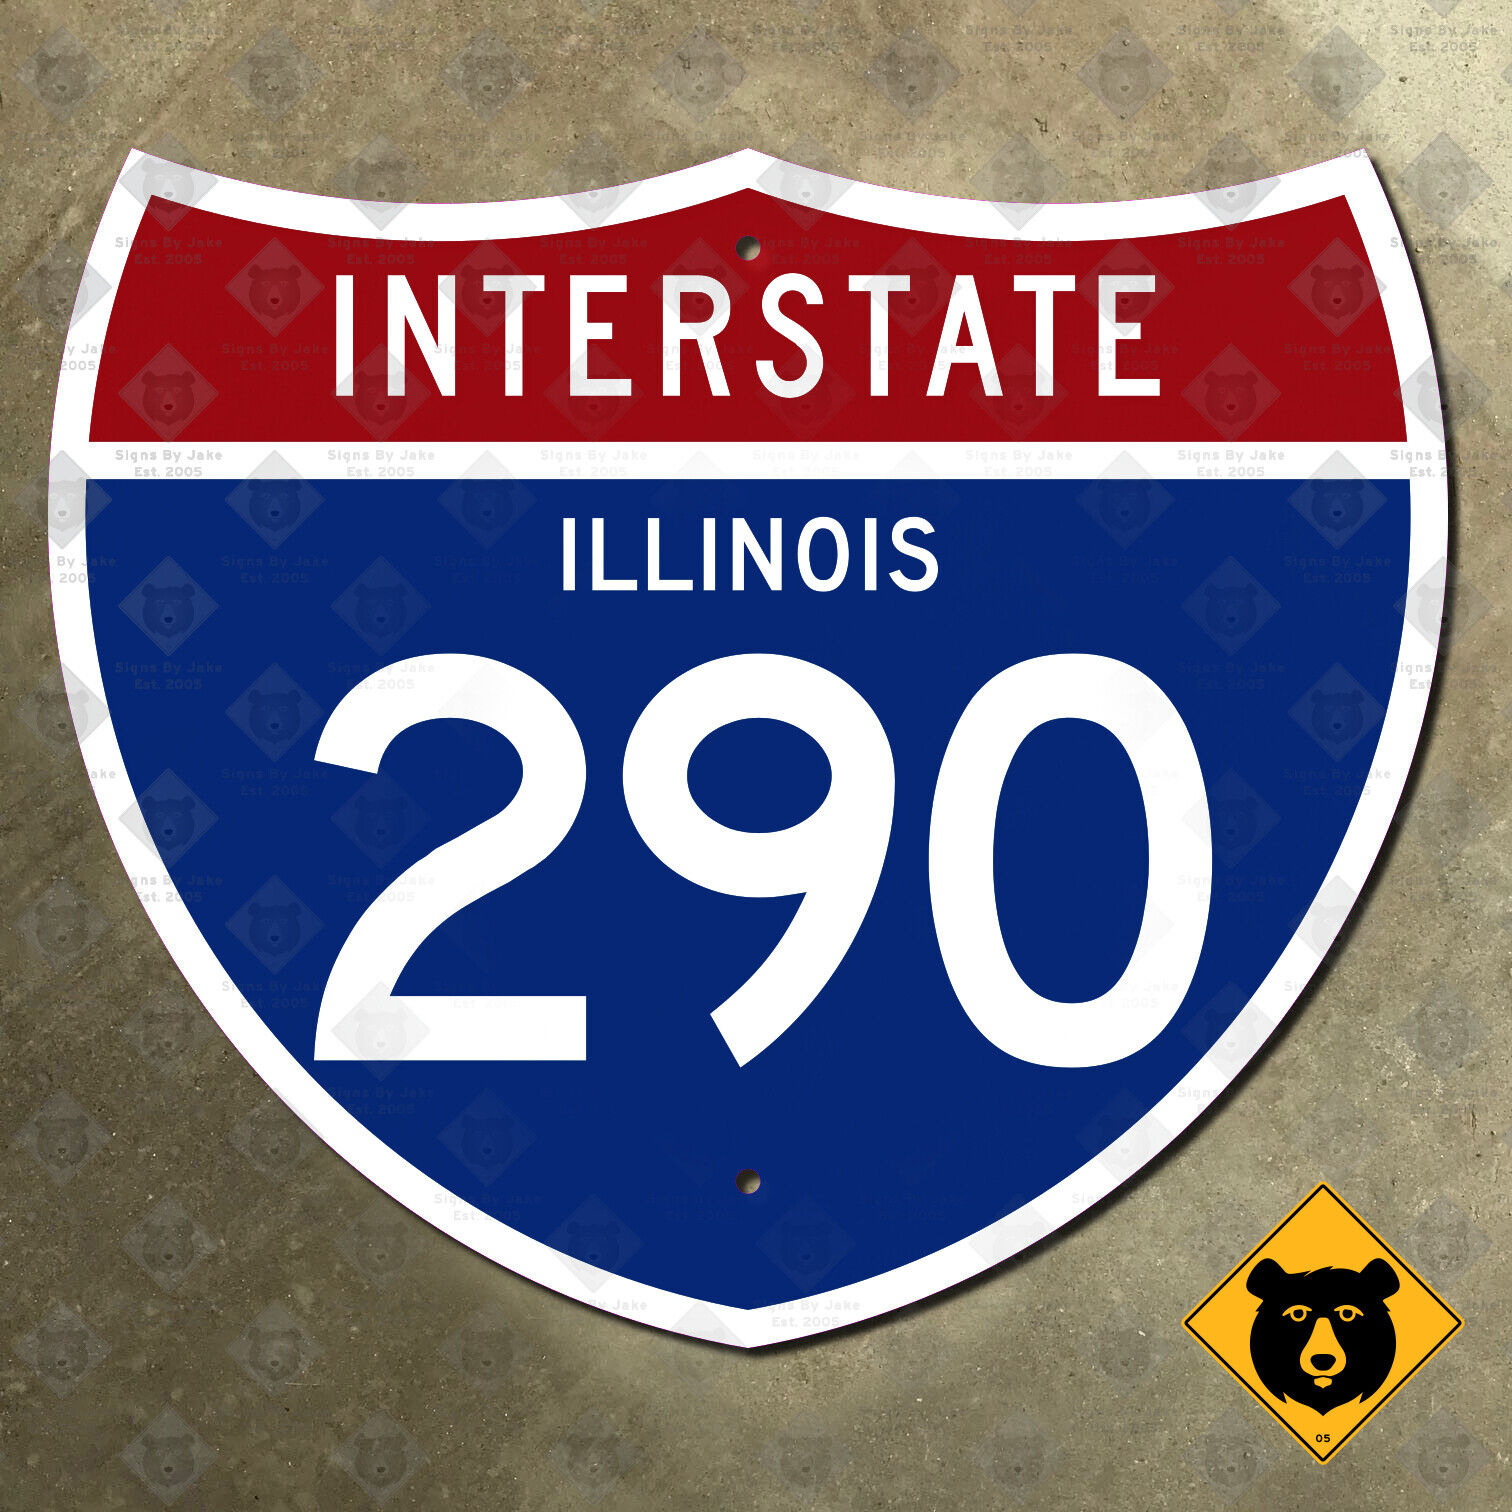 Illinois interstate 290 road sign highway marker Chicago Rolling Meadows 12x10